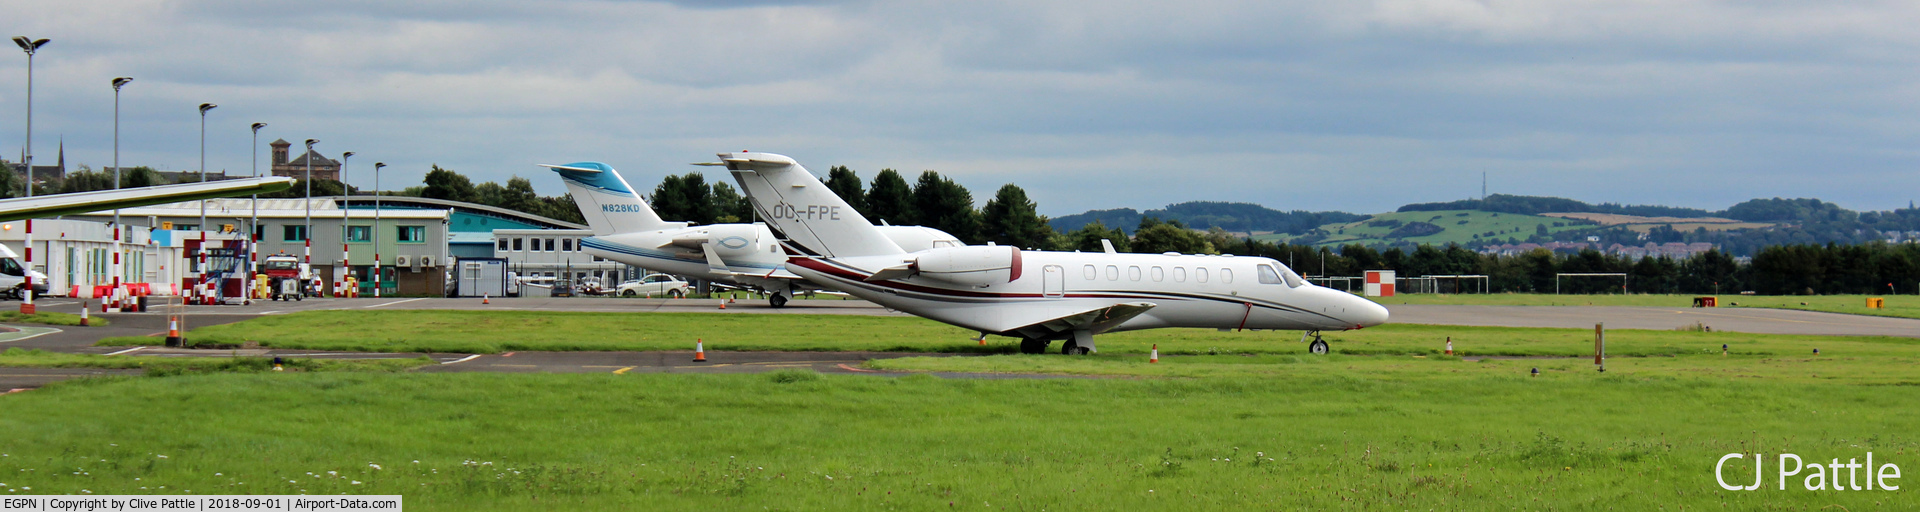 Dundee Airport, Dundee, Scotland United Kingdom (EGPN) - Dundee continues to attract bizjets to the local area.